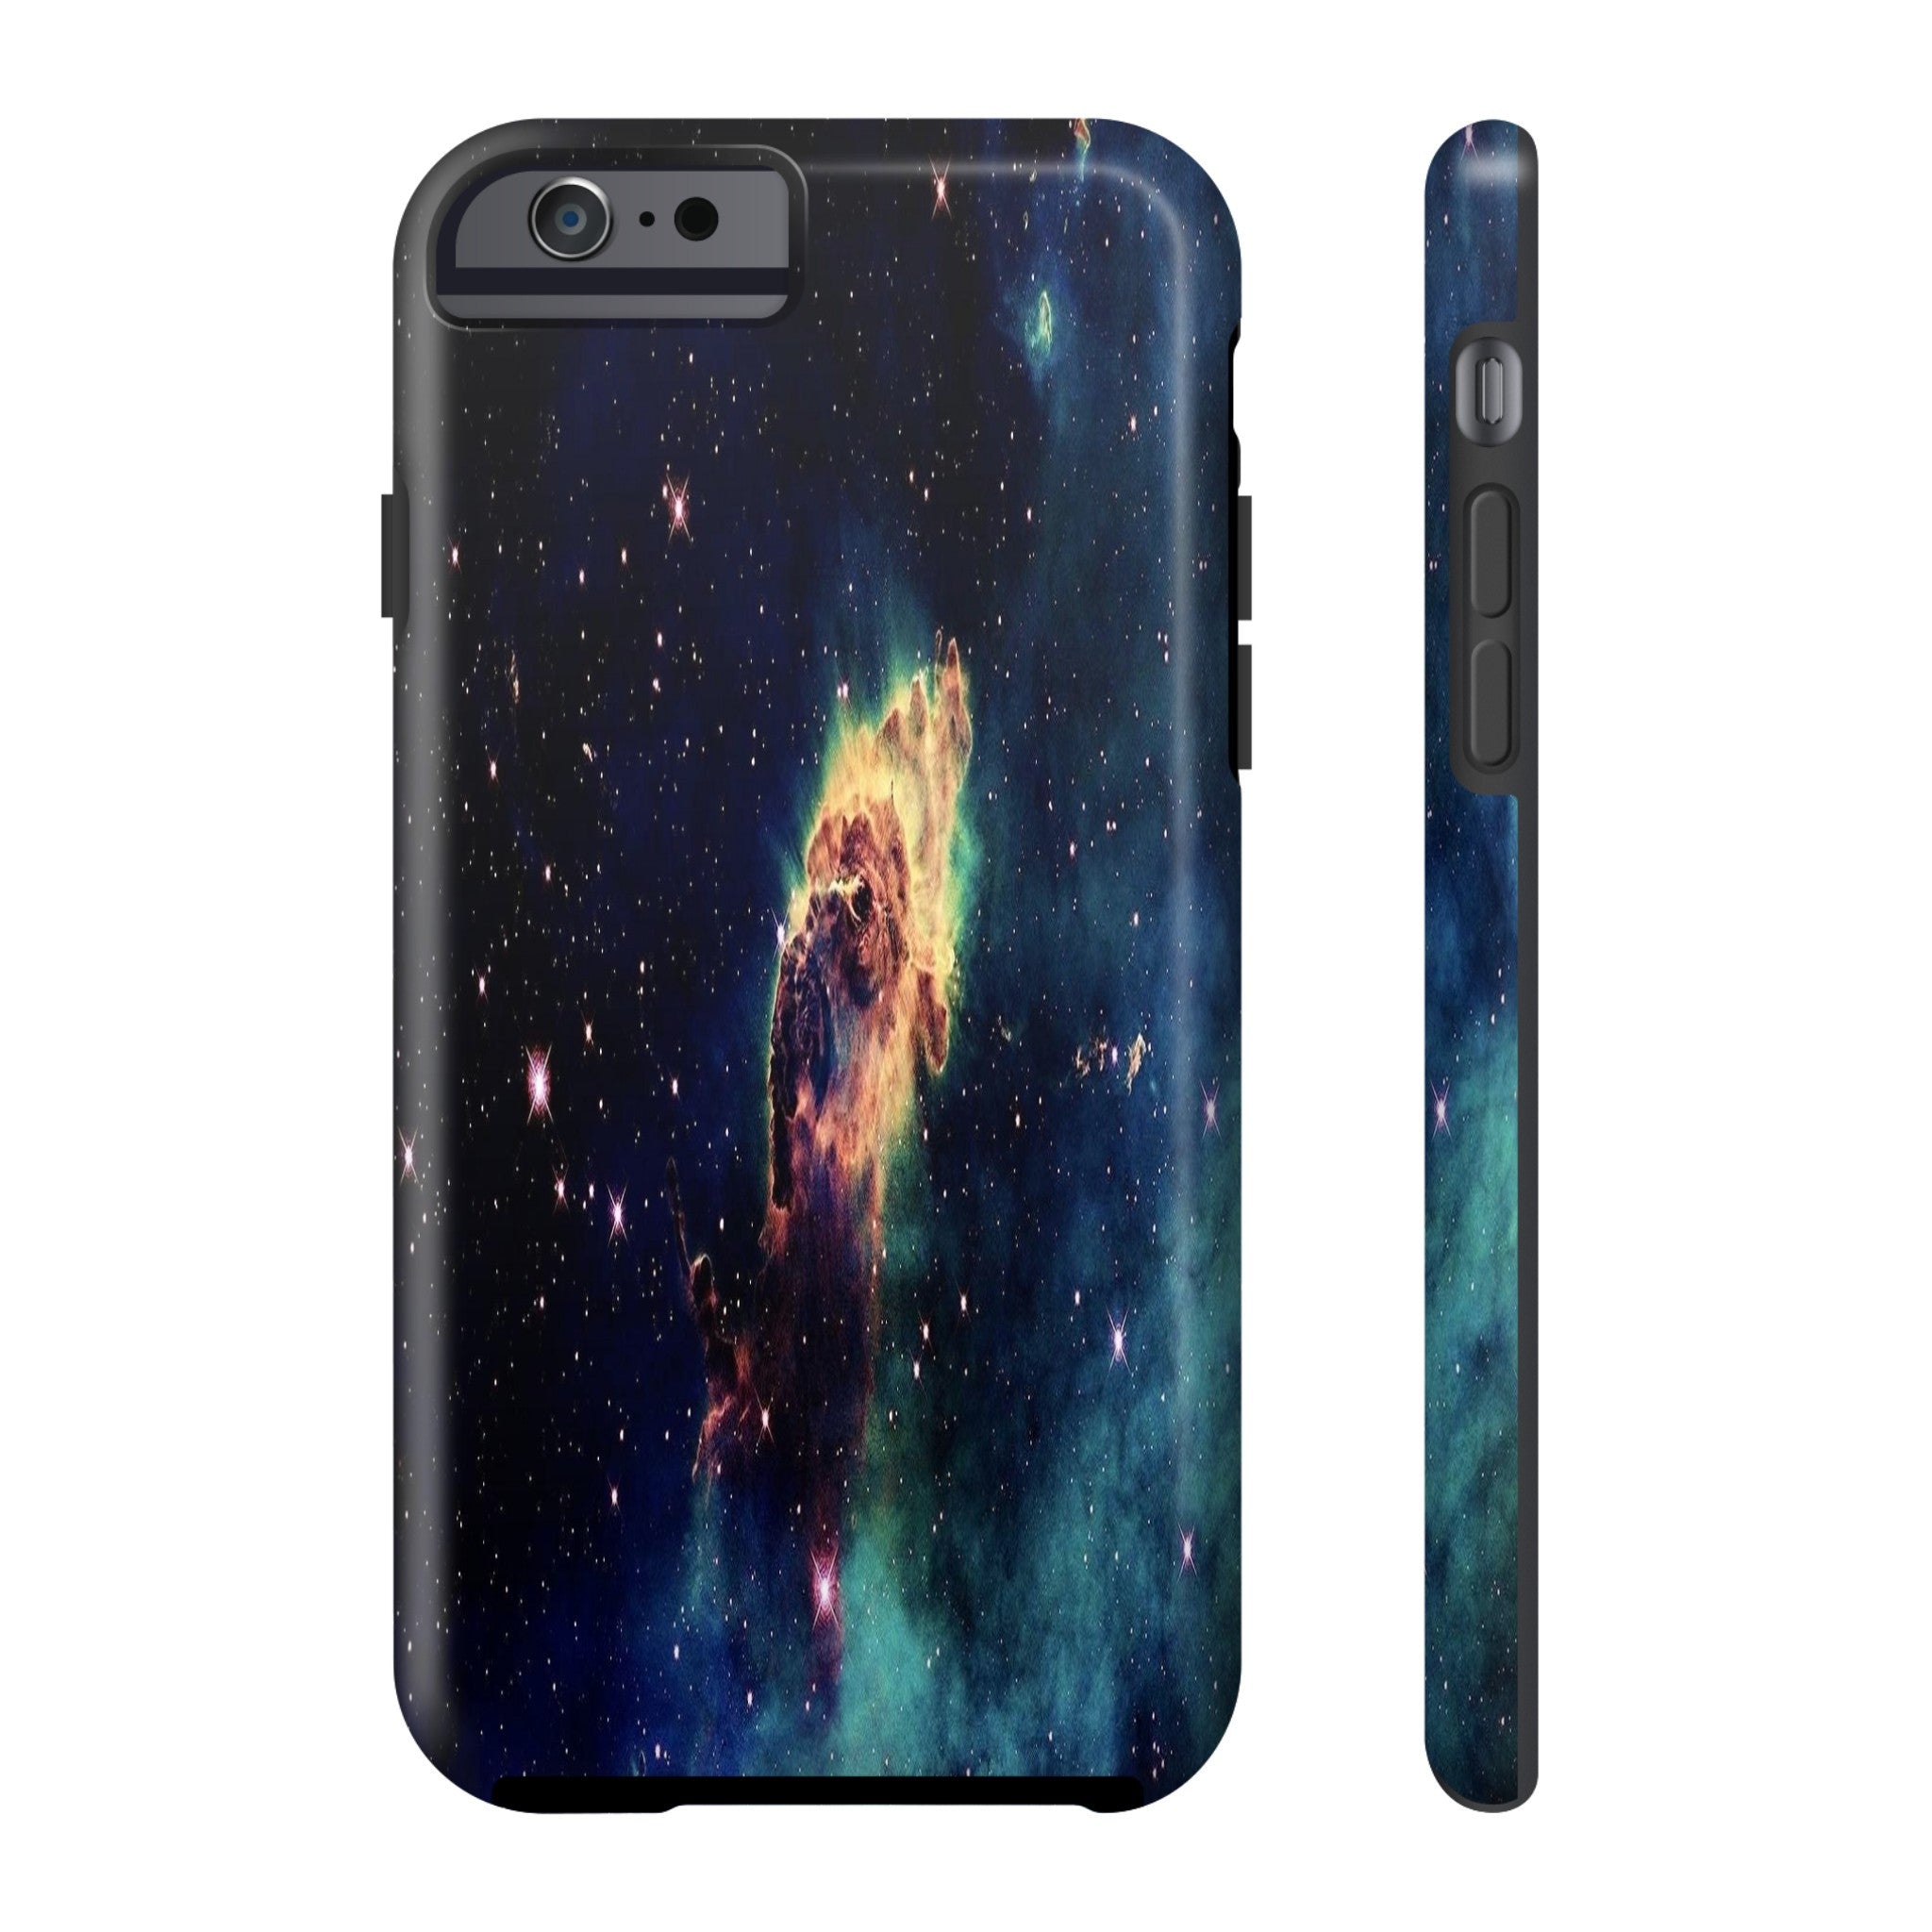 Outer Space Tough Iphone 6/6s